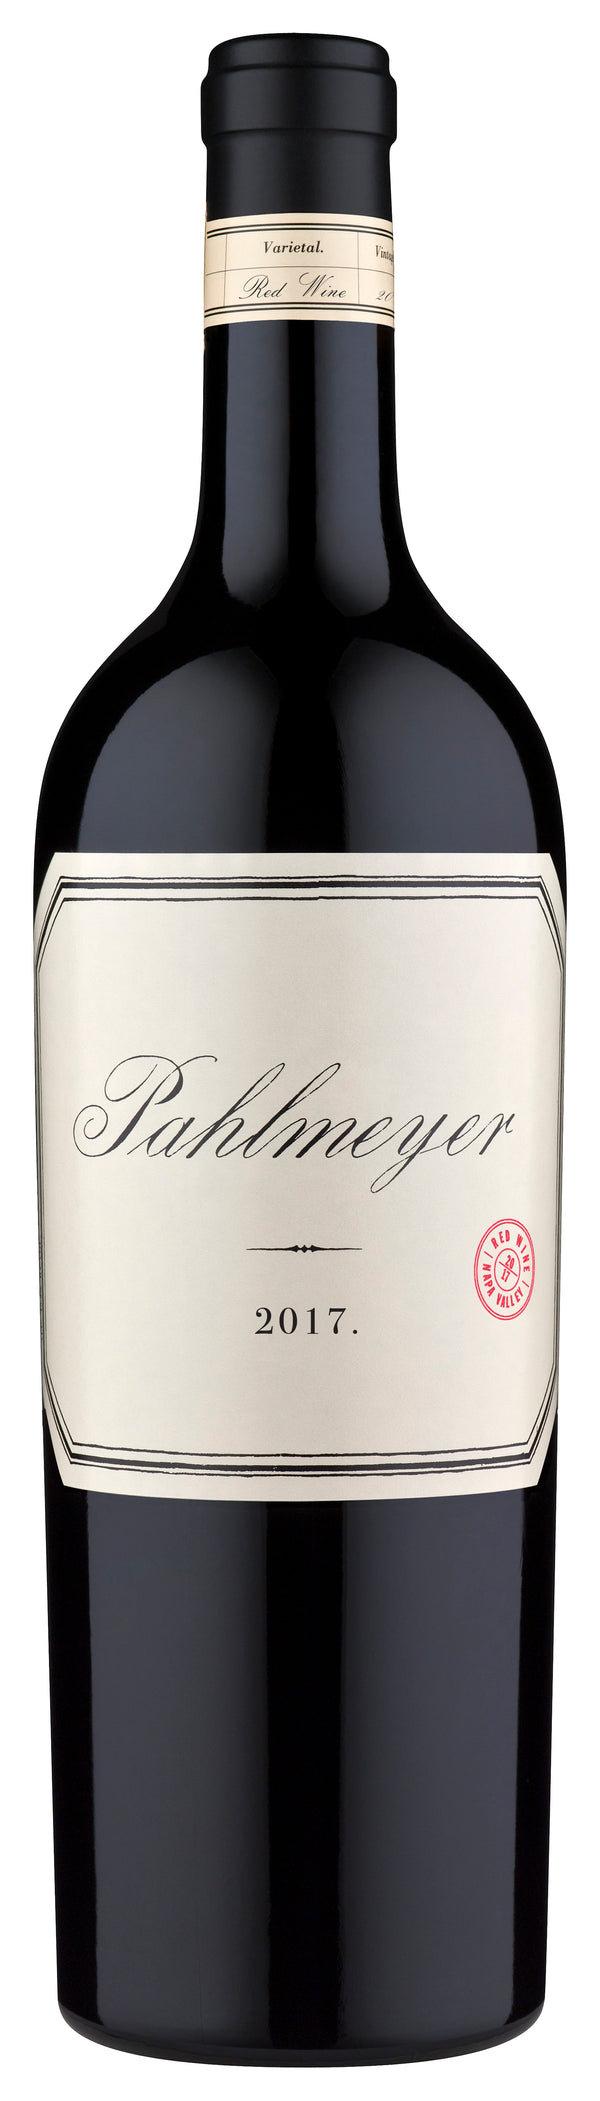 Pahlmeyer, Proprietary Red, Bordeaux Red Blend, Oakville, 2016